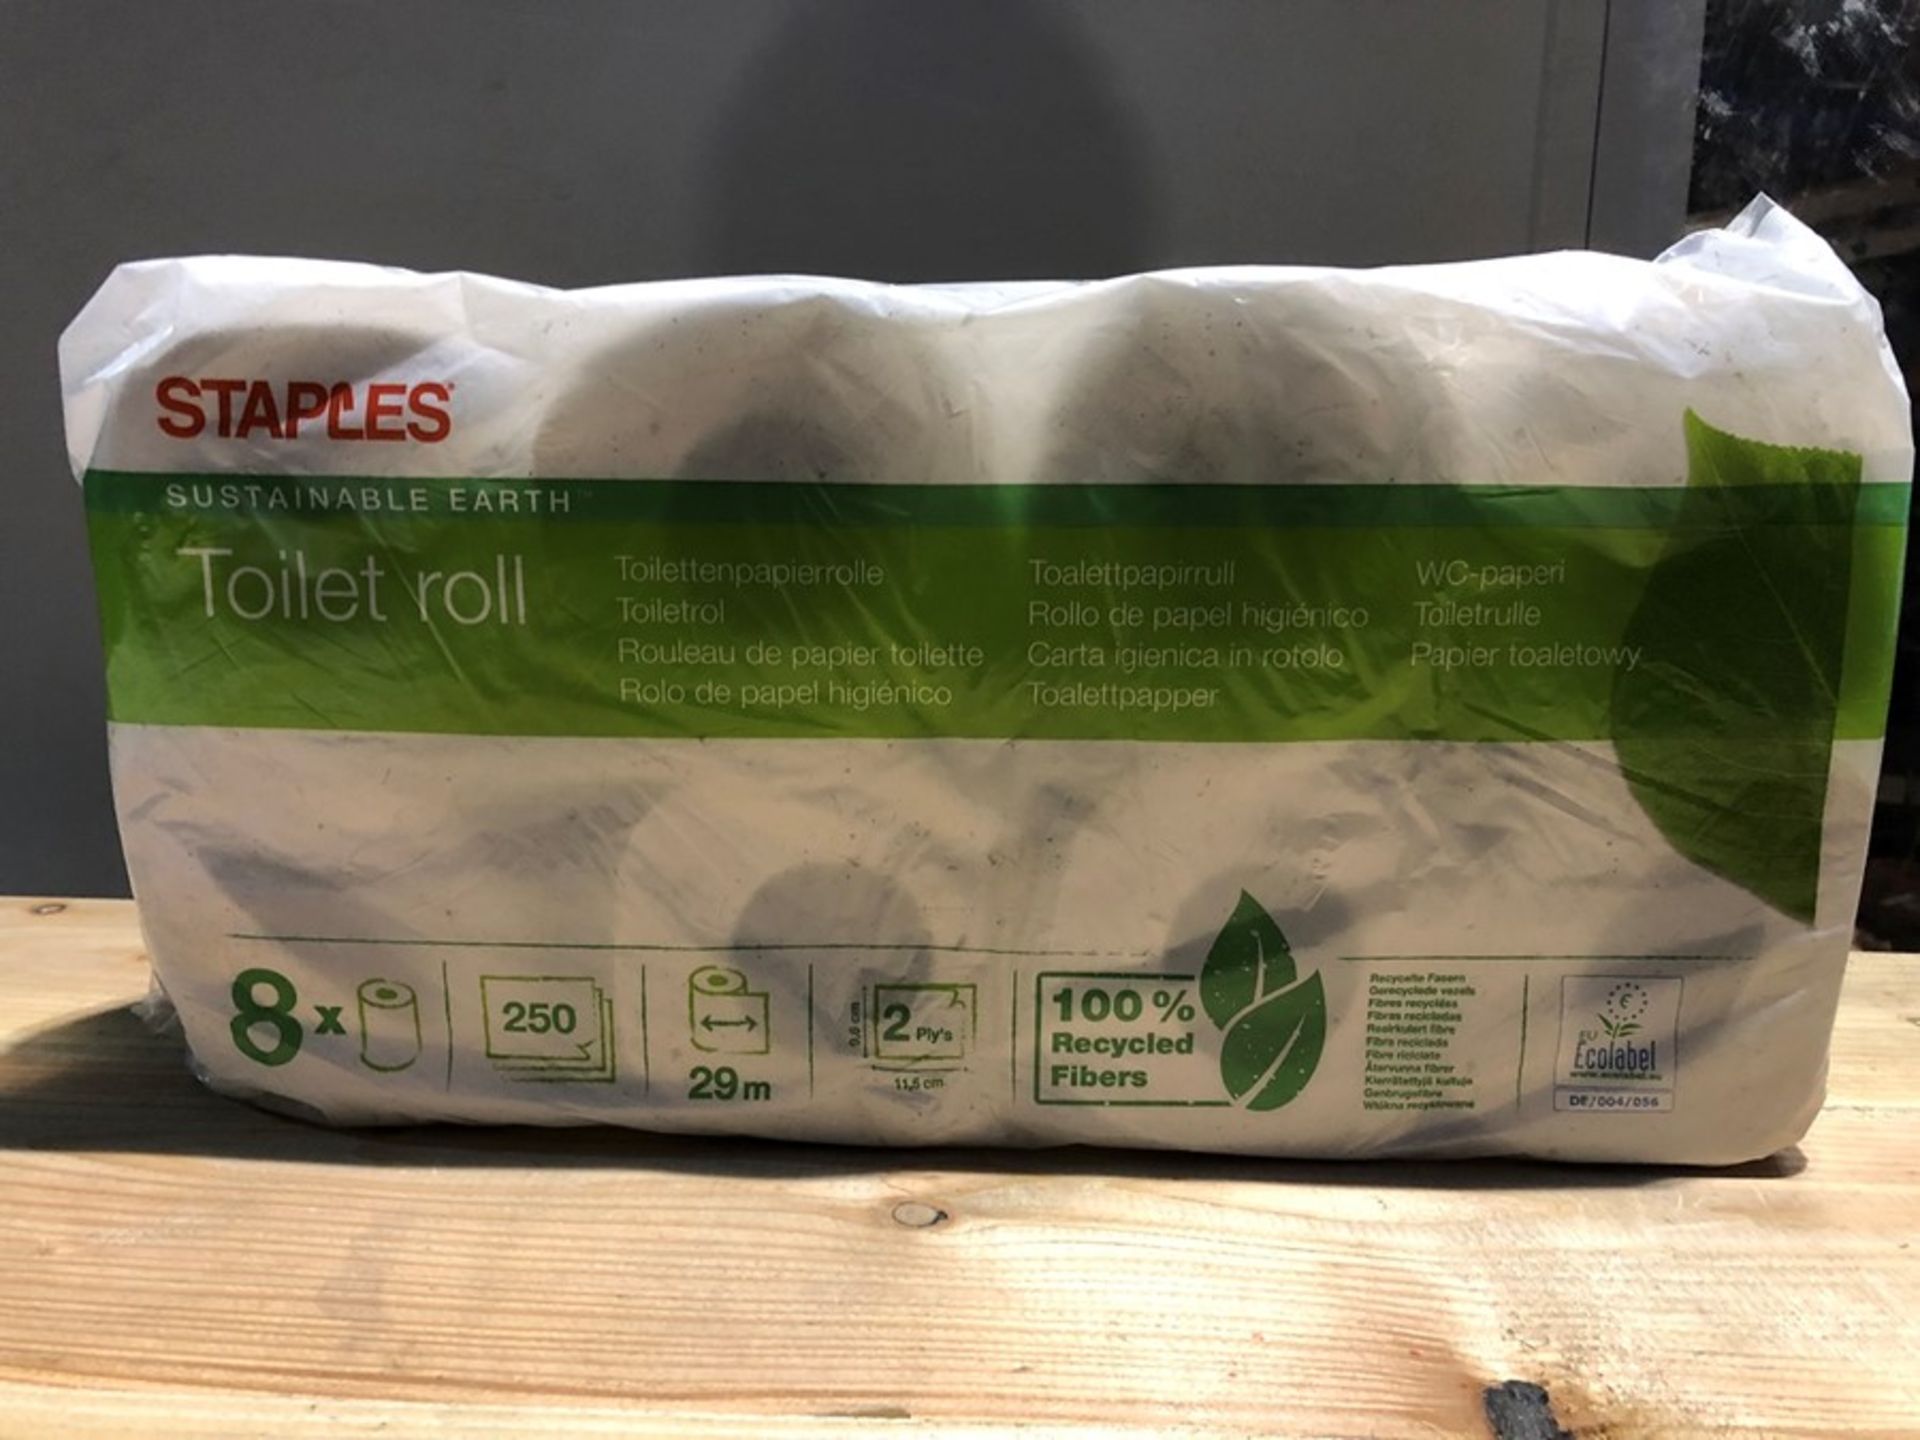 1 BAGGED SET OF 8 STAPLES TOILET ROLLS / PN - 863 (PUBLIC VIEWING AVAILABLE)